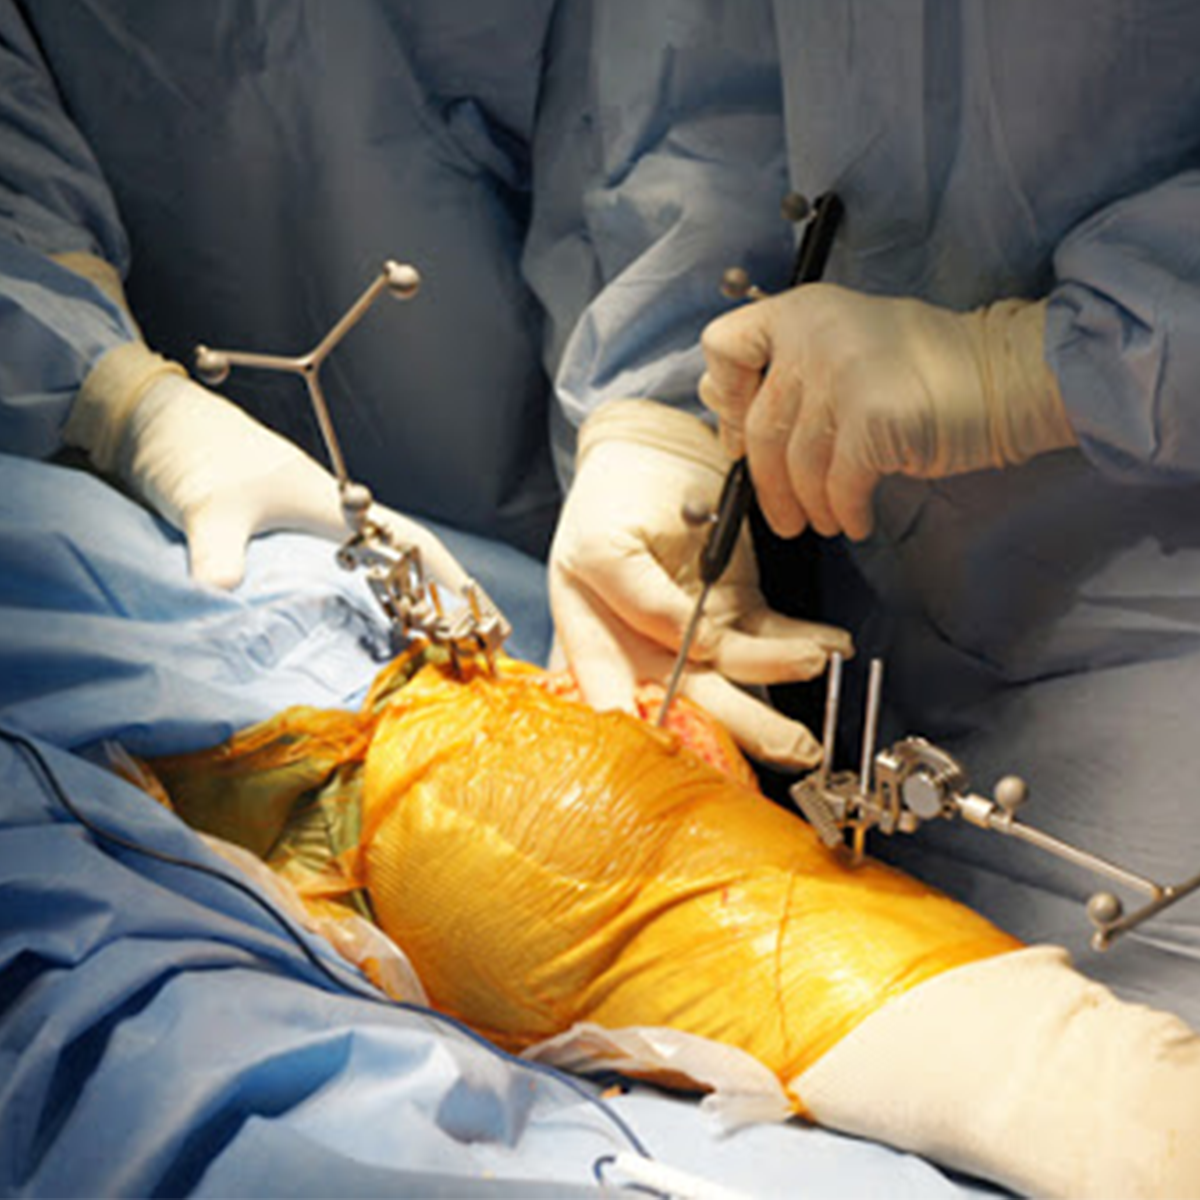 JOINT REPLACEMENT SURGERY